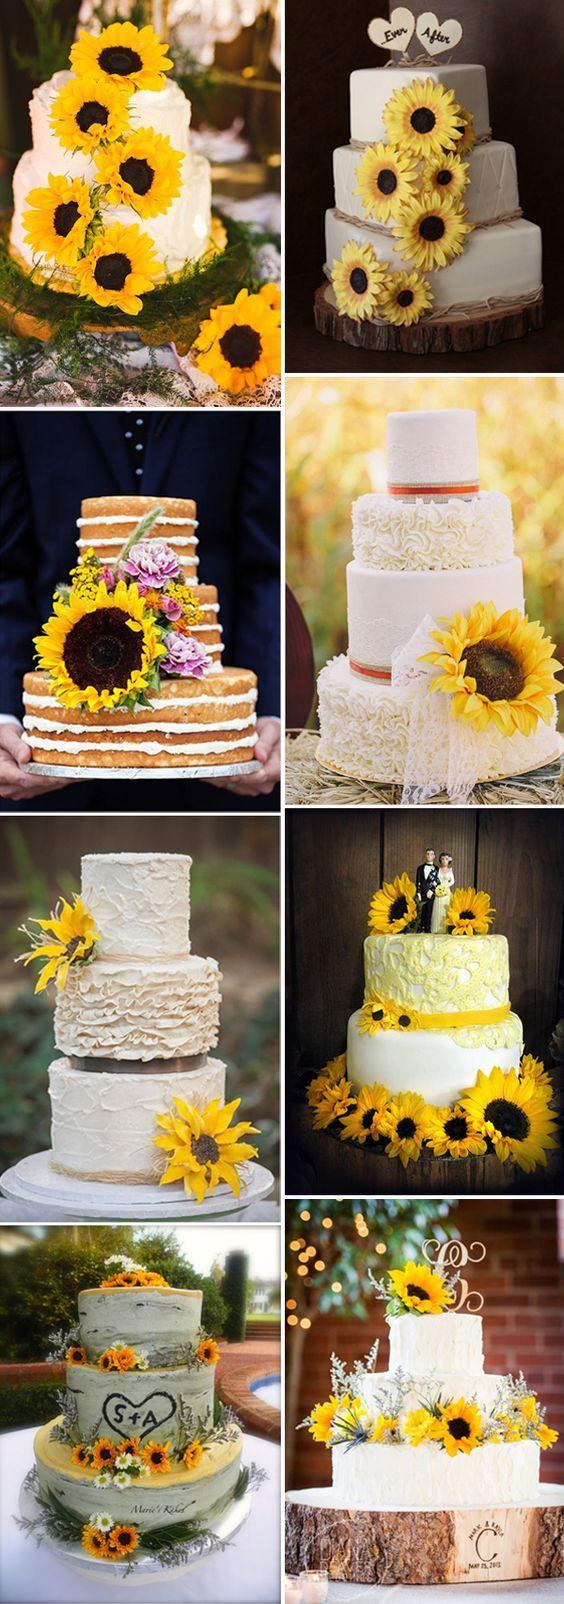 Hochzeit - 32 Orange & Yellow Fall Wedding Cakes With Maple Leaves , Pumpkins & Sunflowers